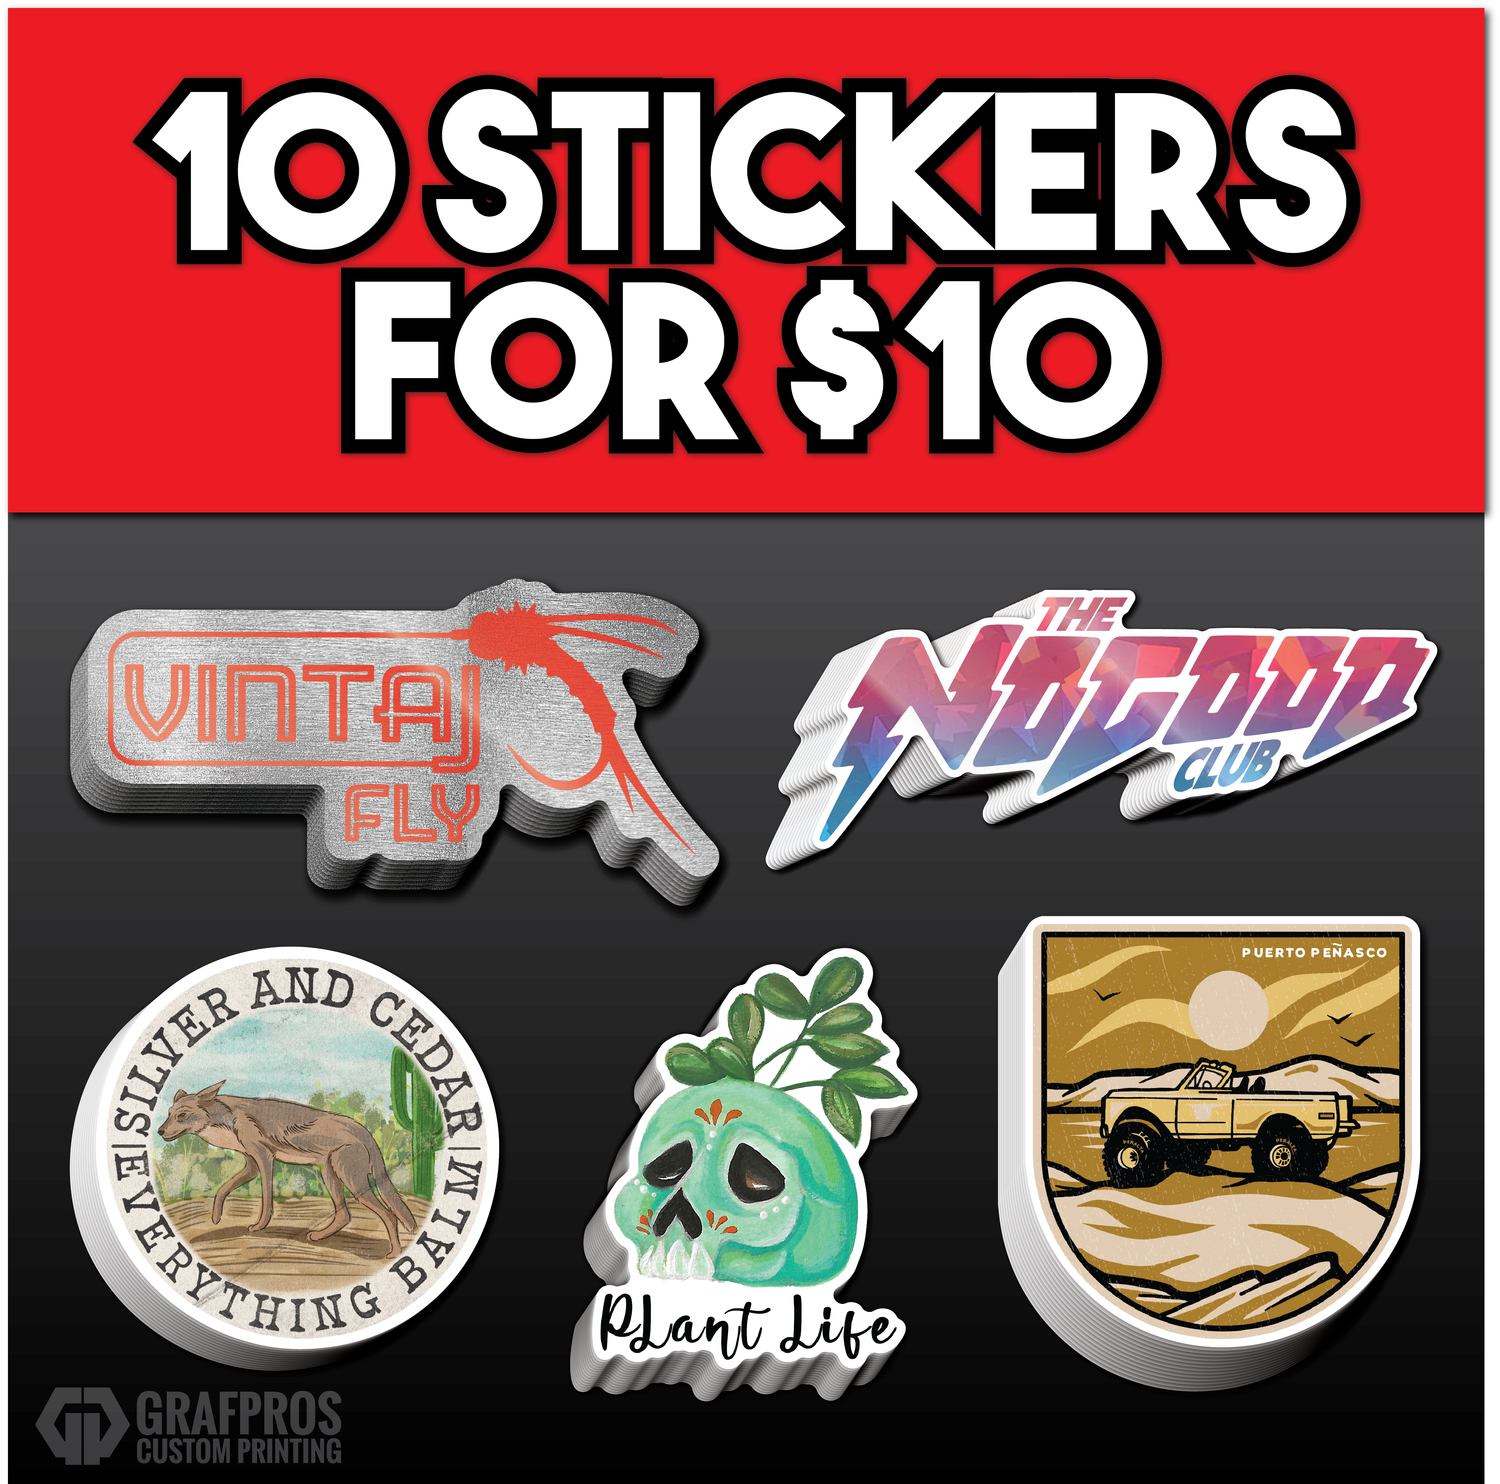 10 Stickers For $10